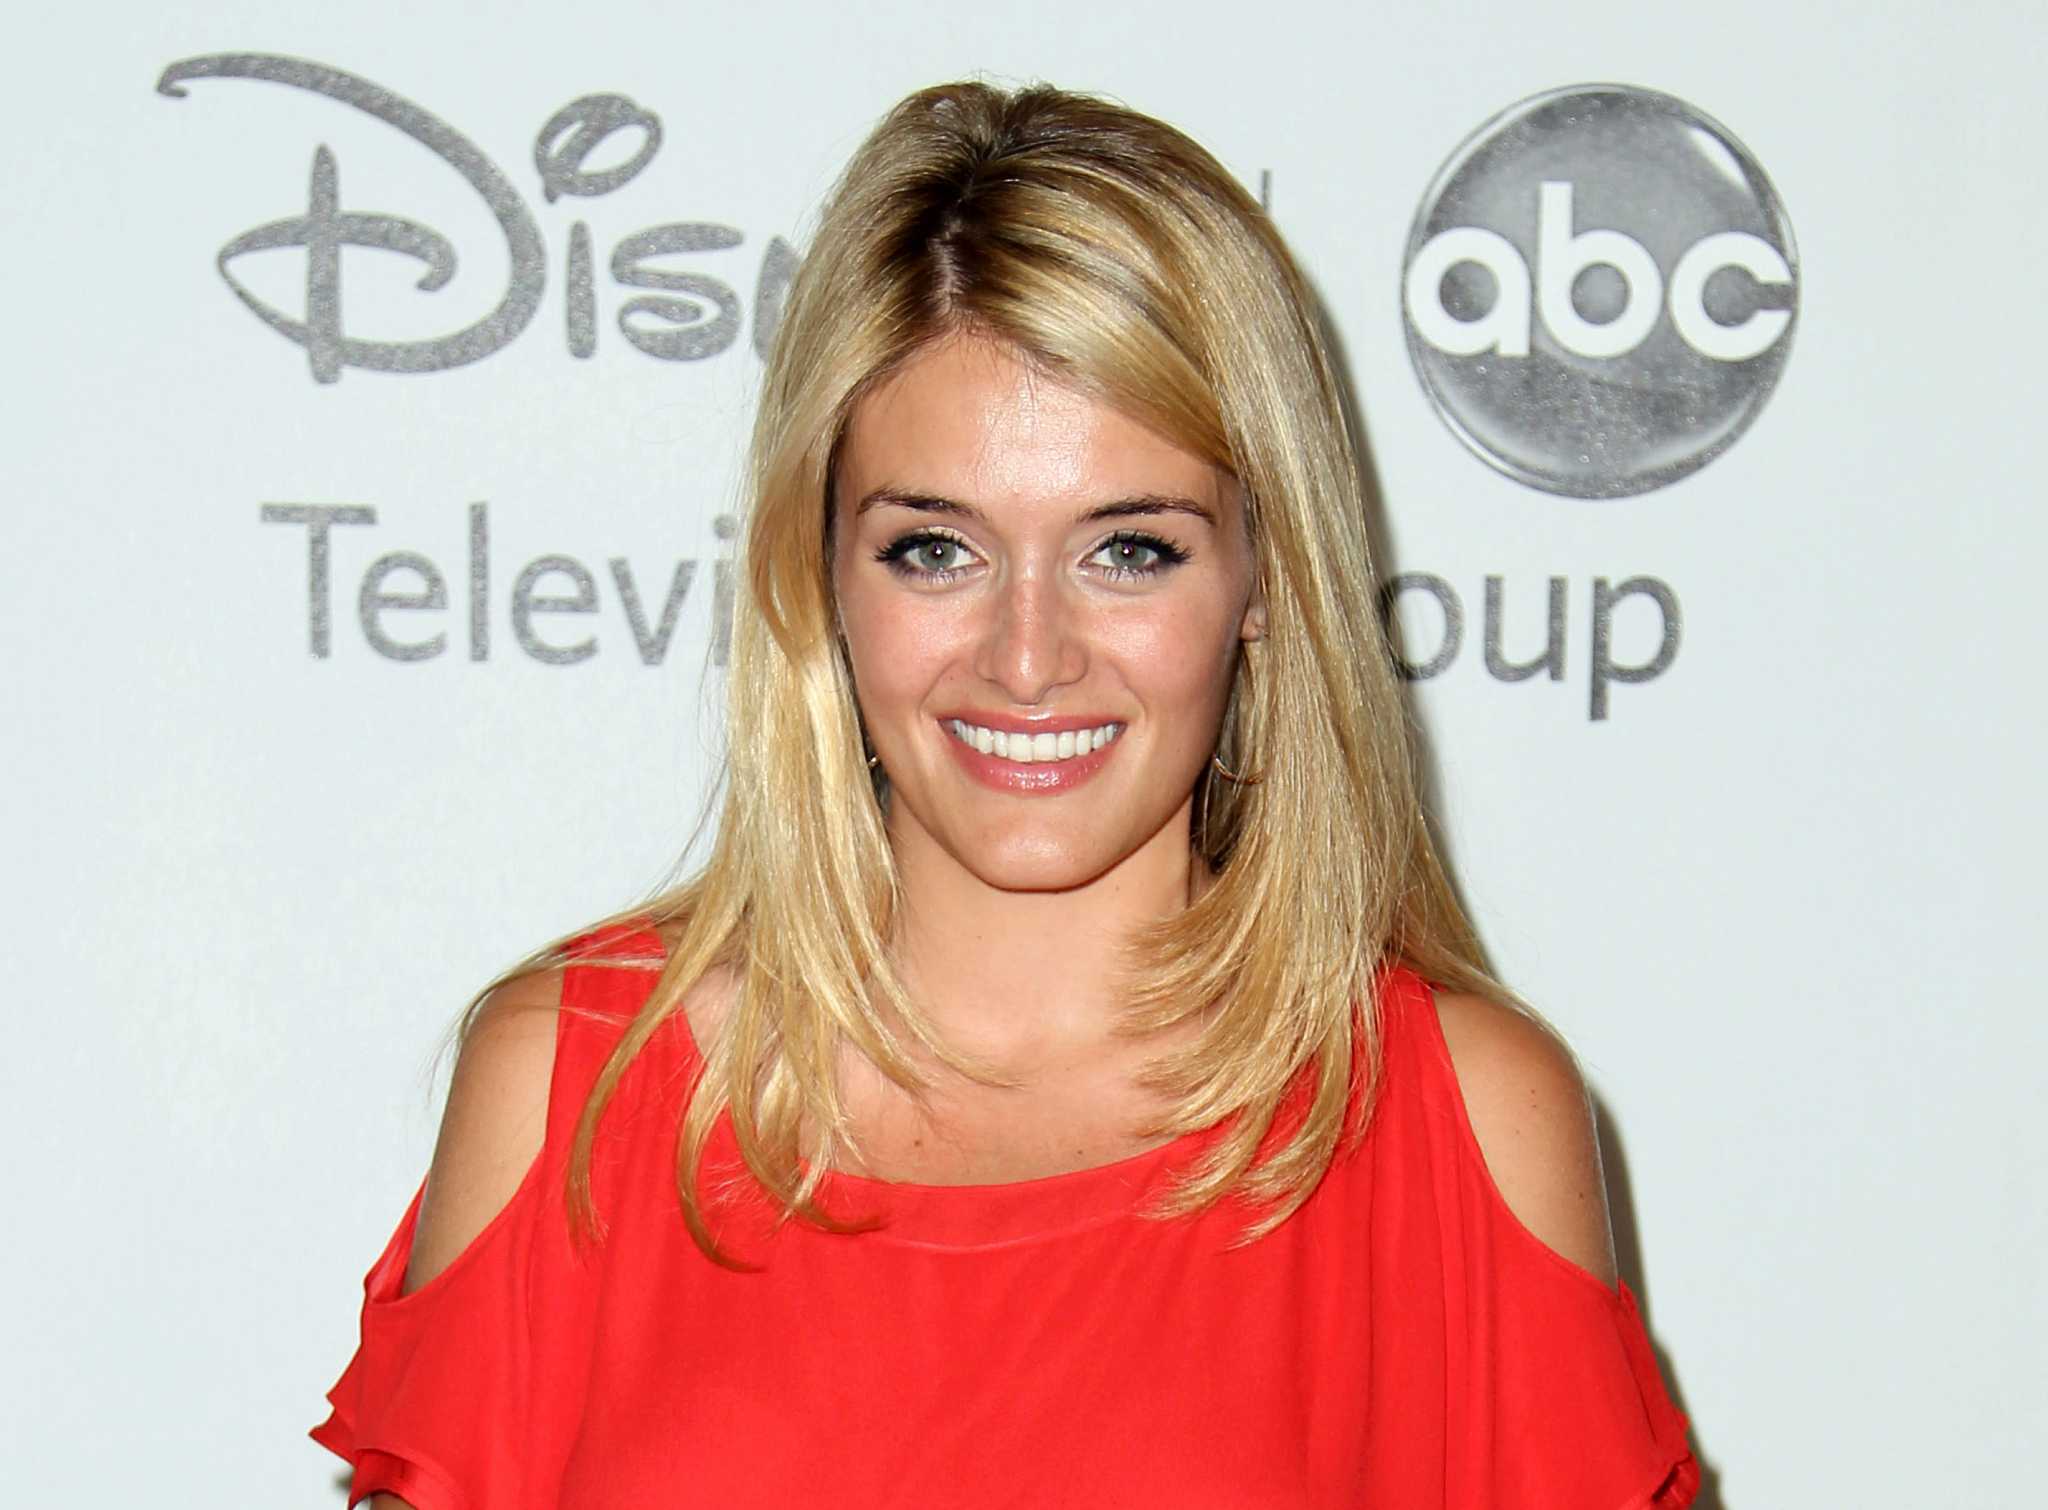 Daphne Oz Of The Chew Reveals She Is Pregnant 